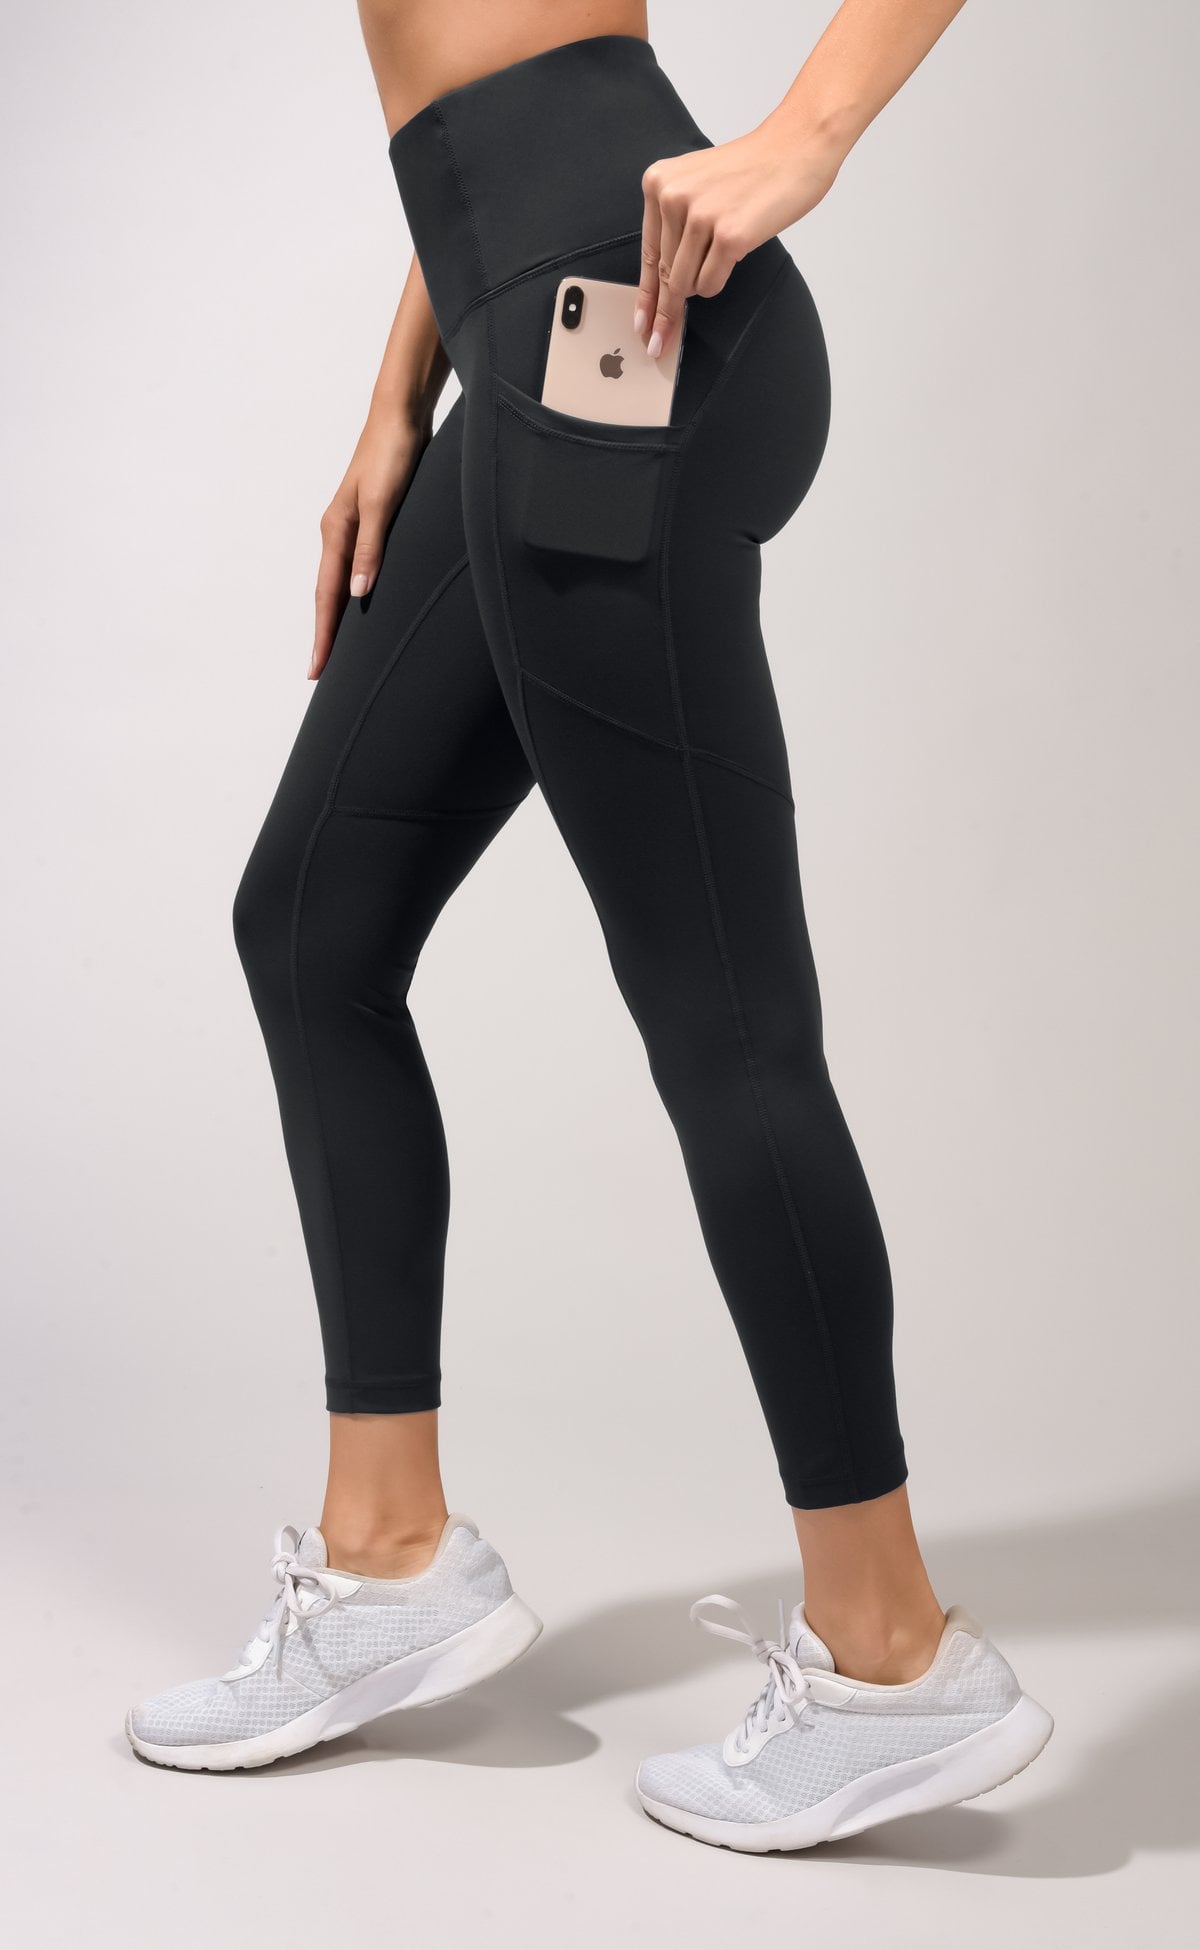 Yogalicious Lux High Waist 7/8 Ankle Legging with Side Pockets, If You're  Looking For the Softest, Most Comfortable Leggings Around, We've Got You  Covered